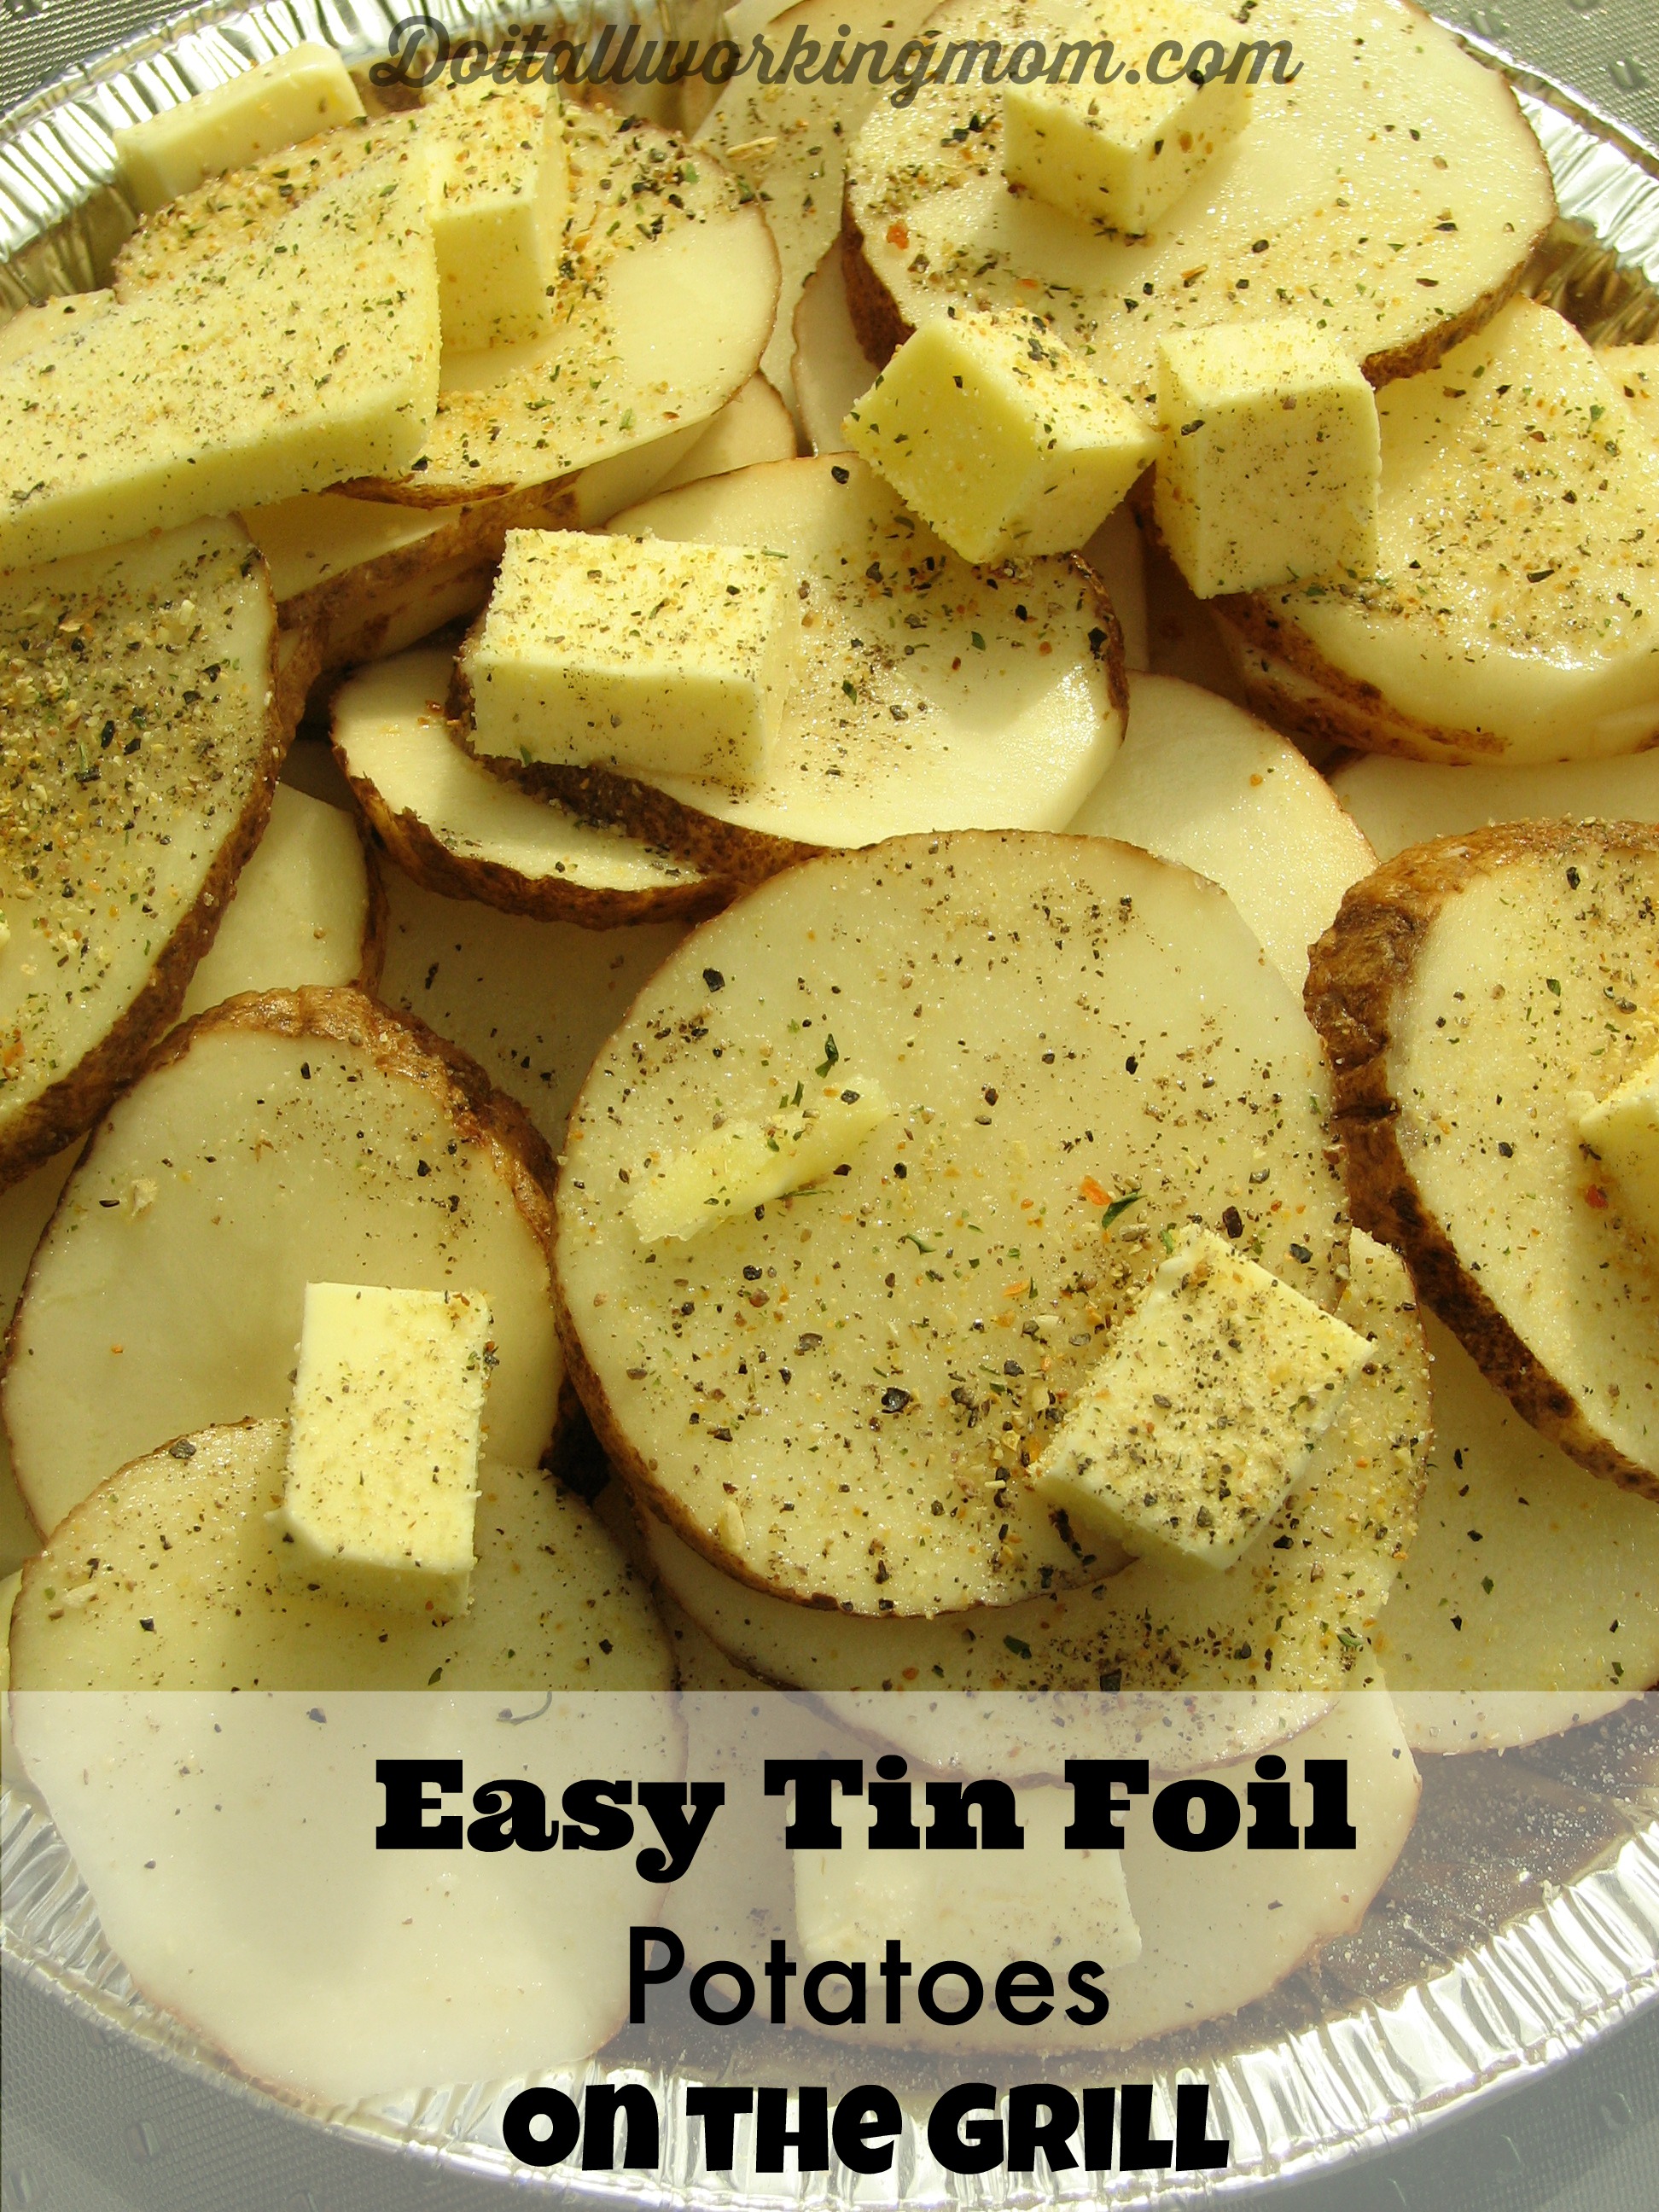 Easy Tin Foil Potatoes on the Grill